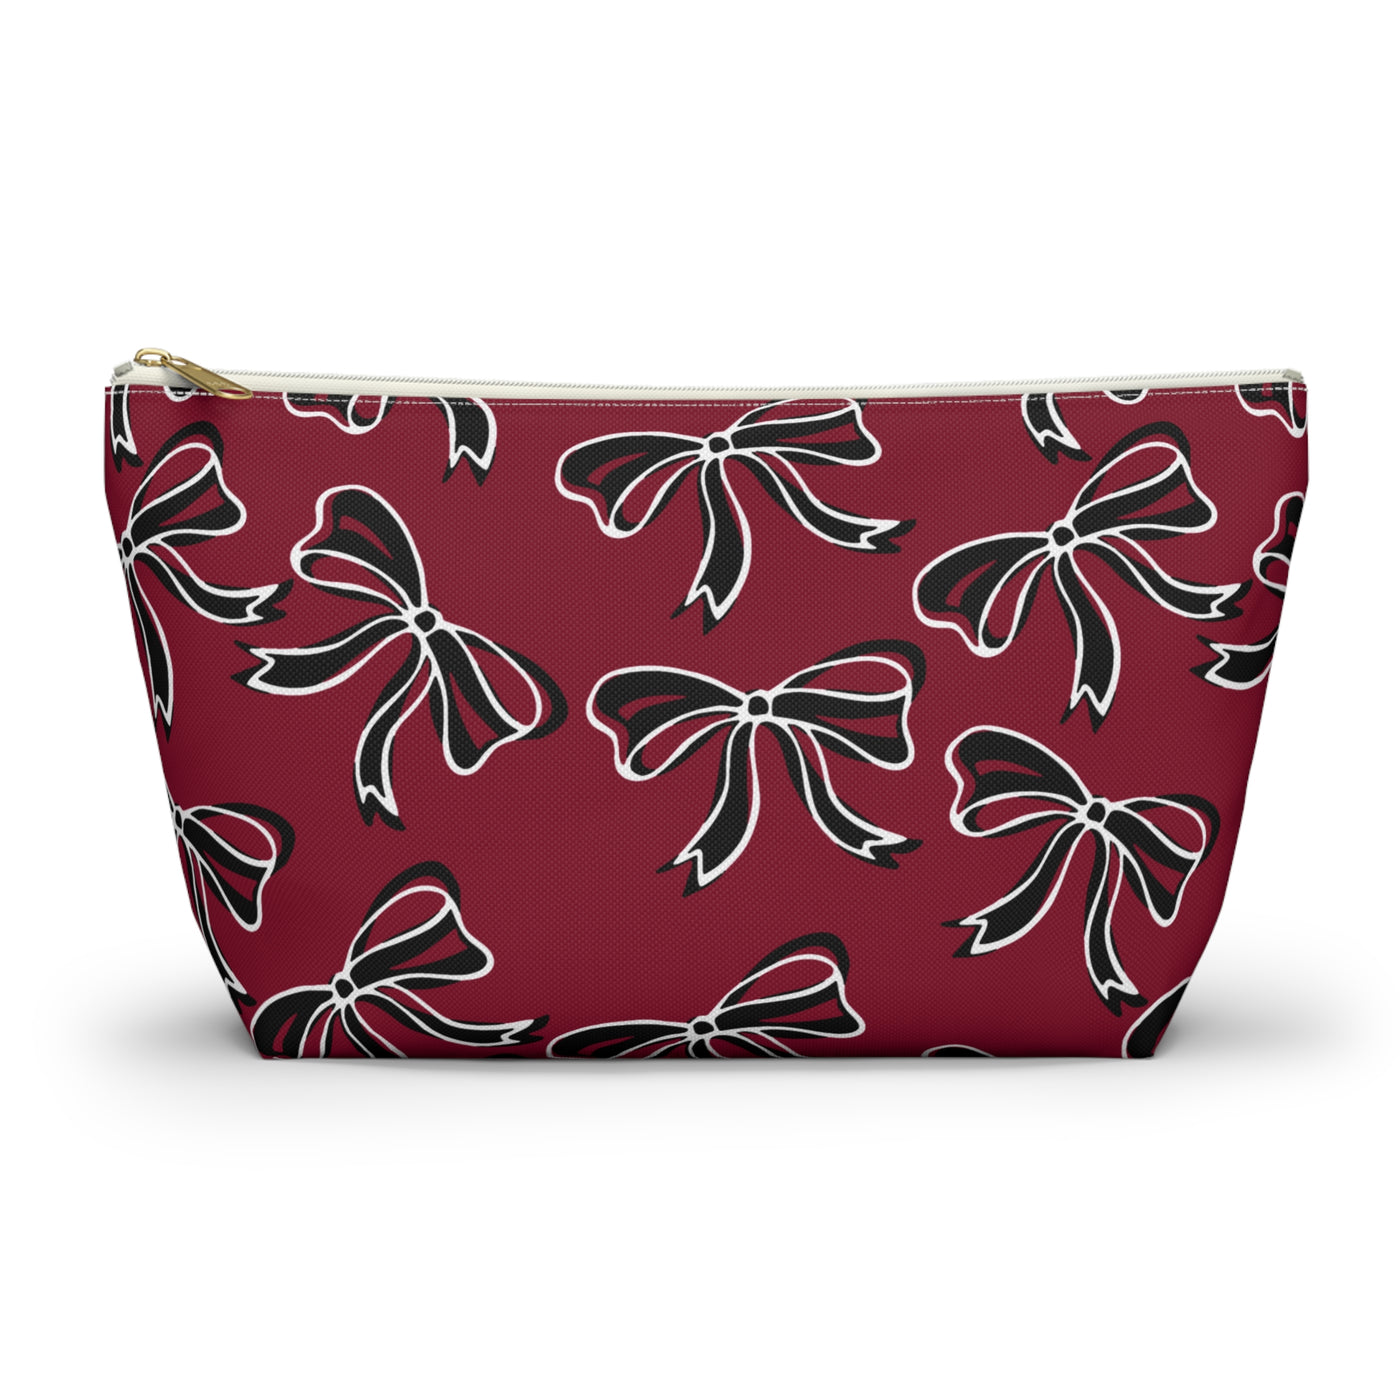 Trendy Bow Makeup Bag - Graduation Gift, Bed Party Gift, Acceptance Gift, College Gift, South Carolina, Gamecocks, USC, garnet and black